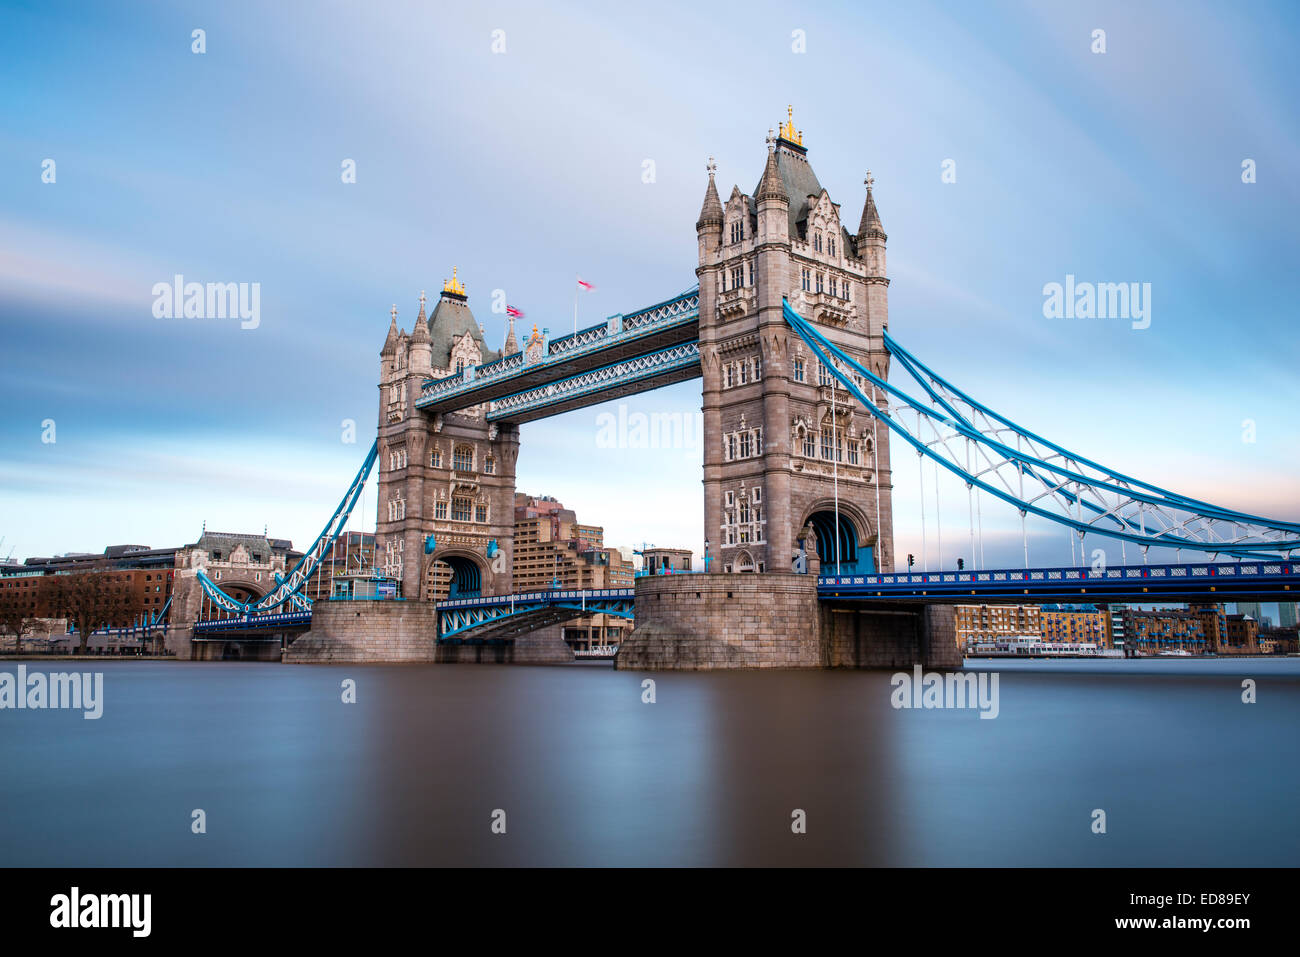 London Tower Bridge on the Thames River. It is an iconic symbol of London, United Kingdom. Stock Photo